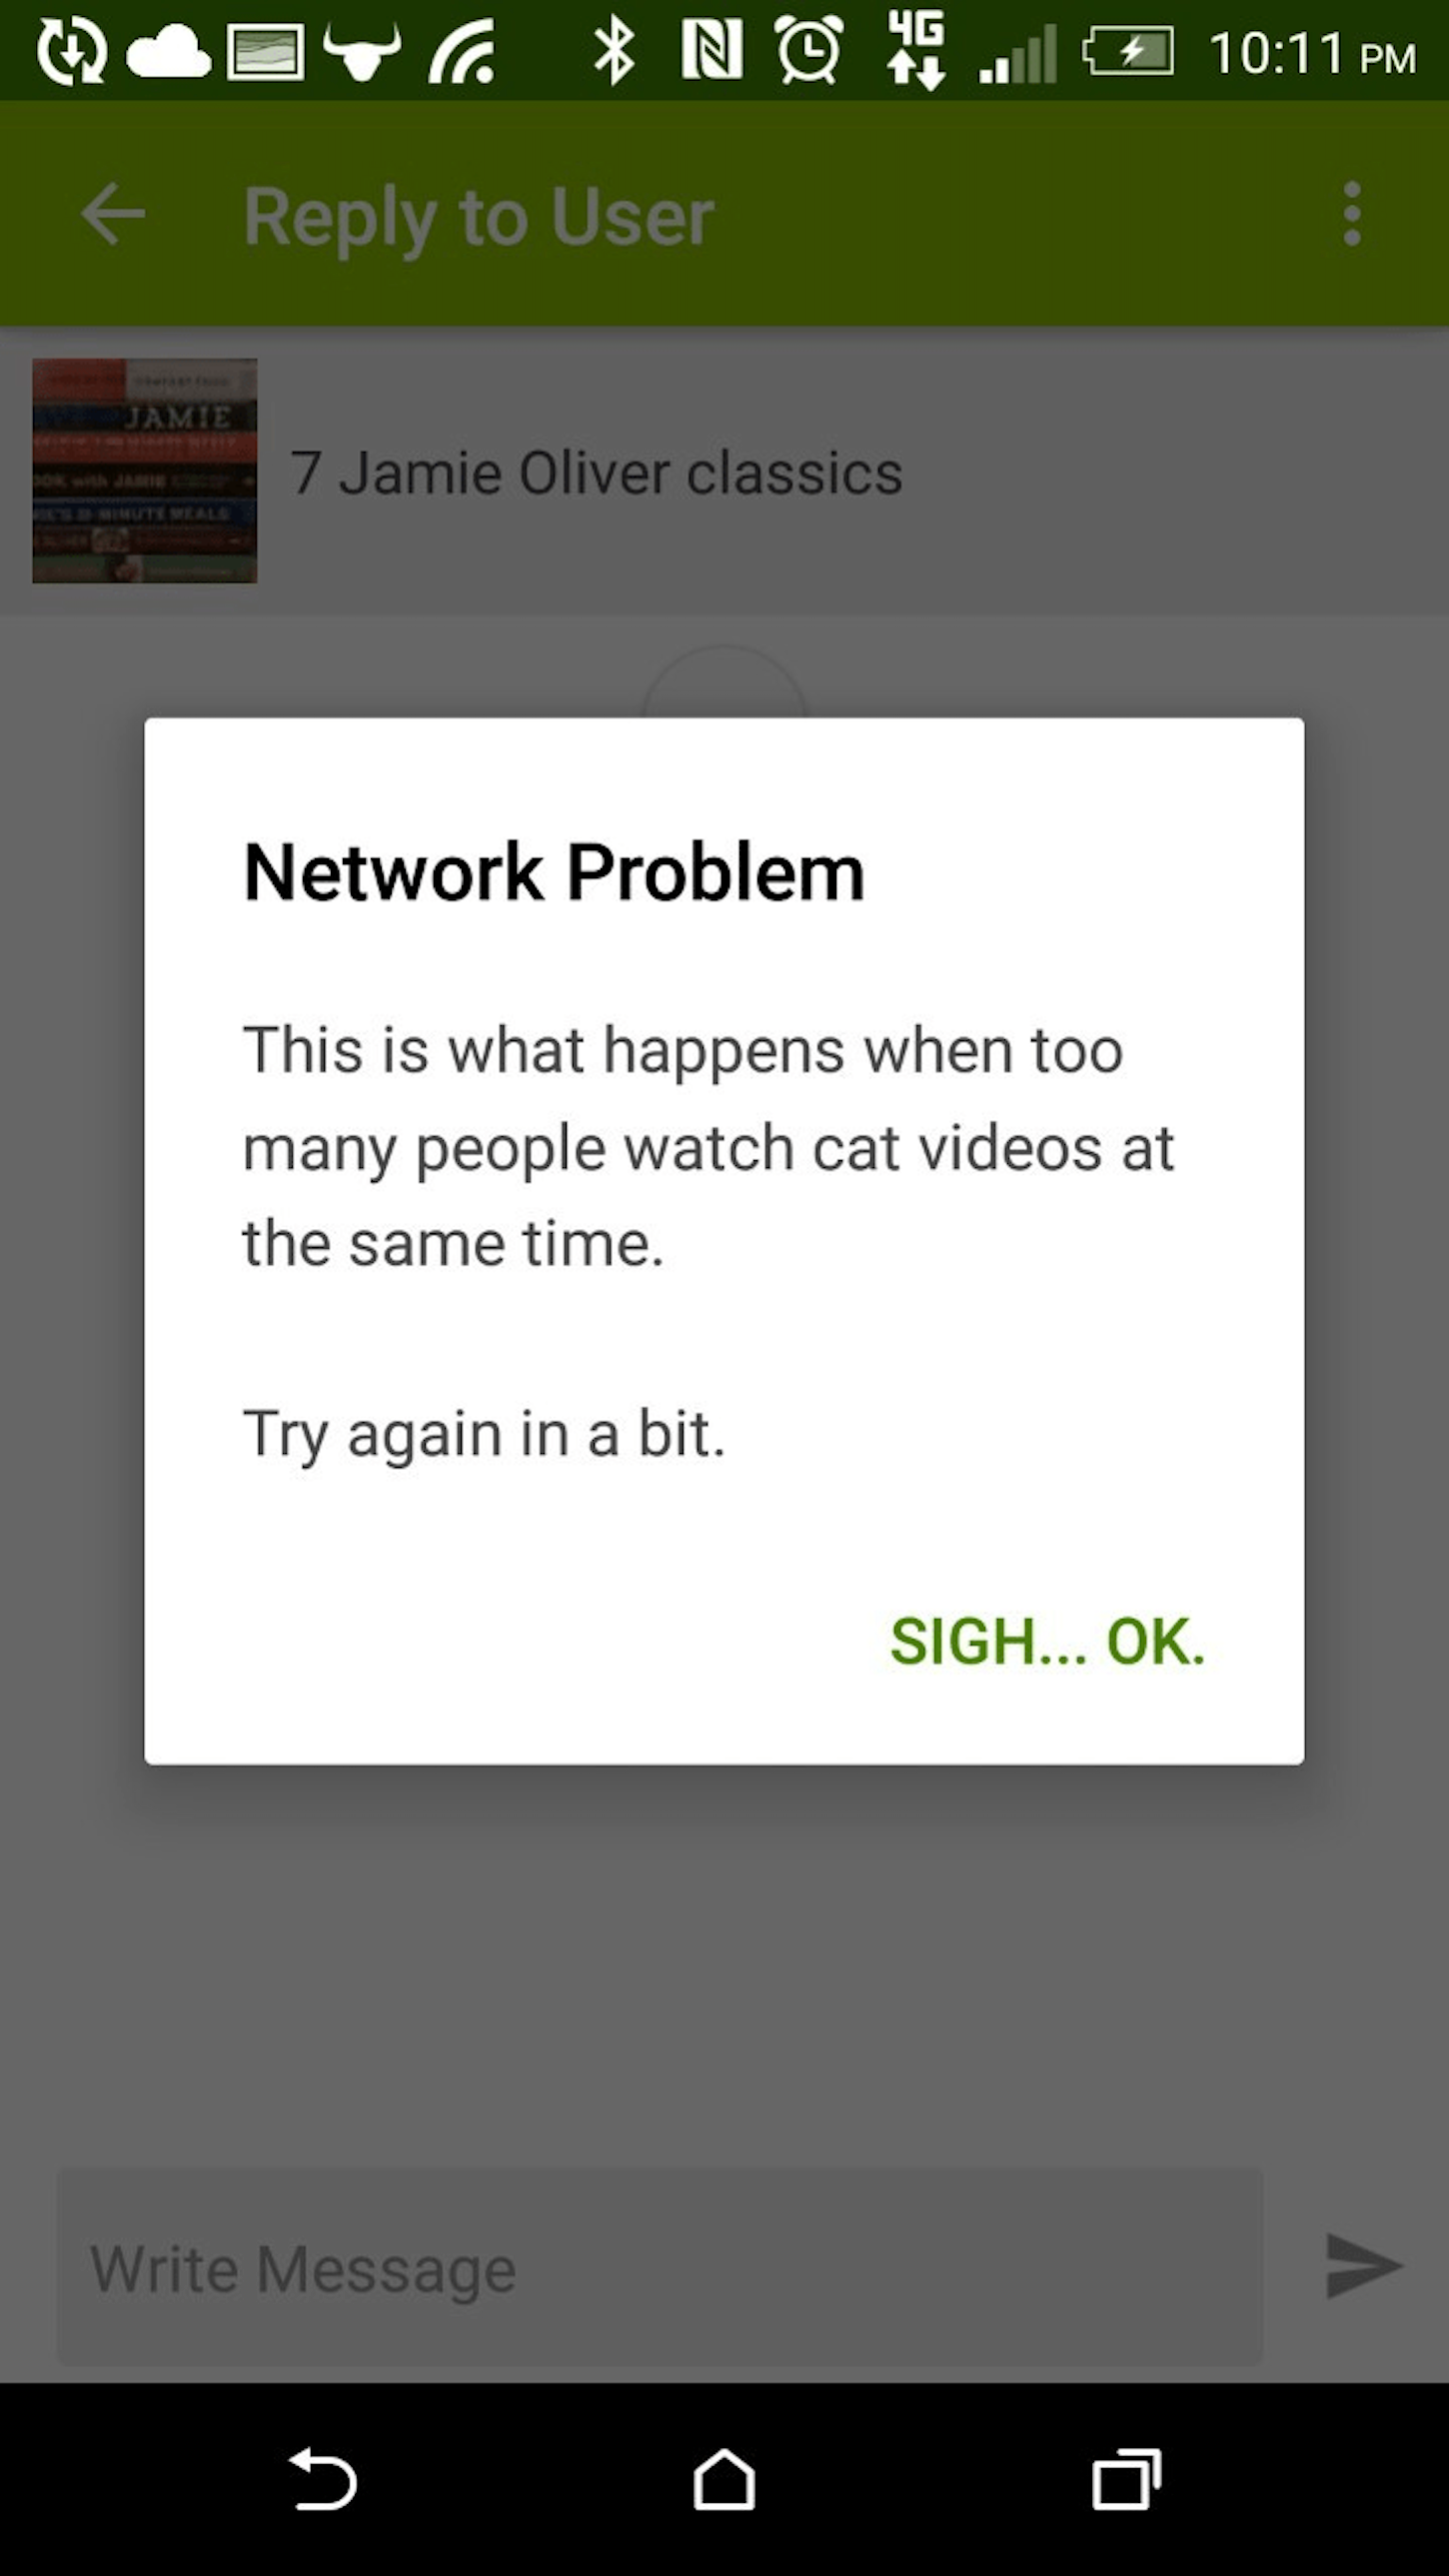 microcopy: screenshot of a pop-up notification telling the user there is a network problem by making a joke about too many people watching cat videos at the same time. It tells the user to try again later.